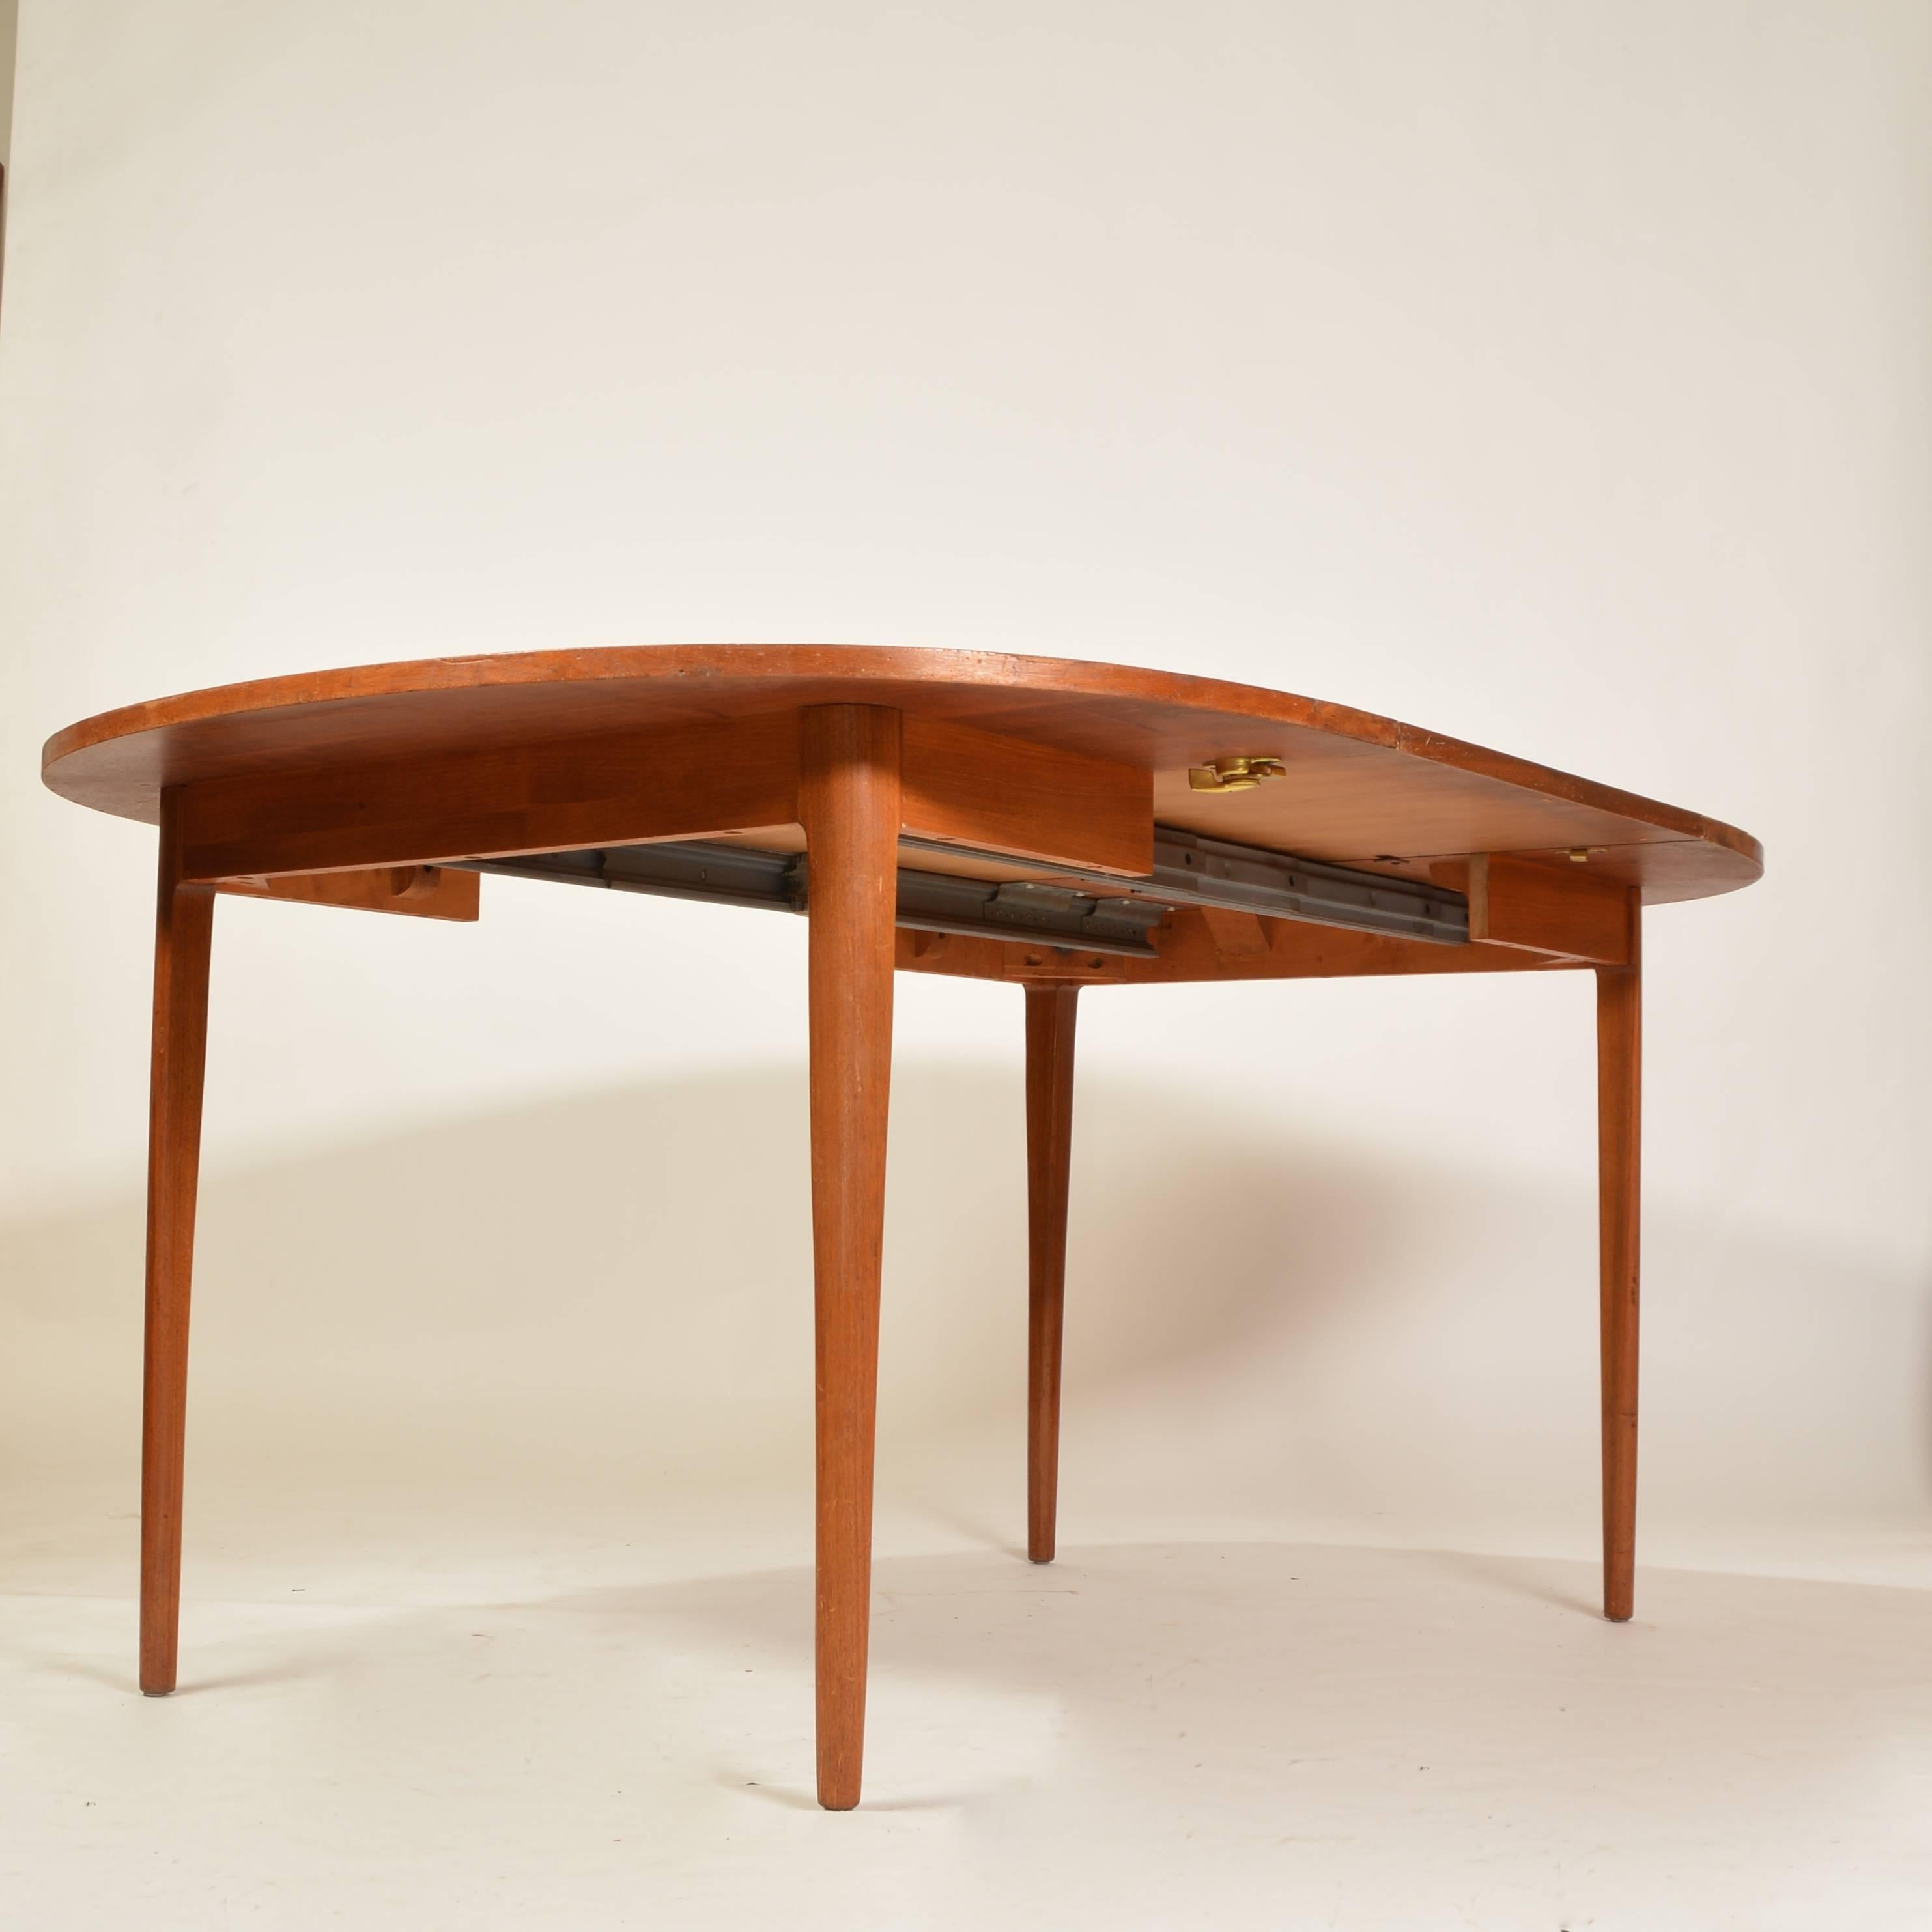 This is a beautiful american modern dining table by Kipp Stewart for Drexel.  The  finish retains the unique Drexel warmth.  Includes a 20